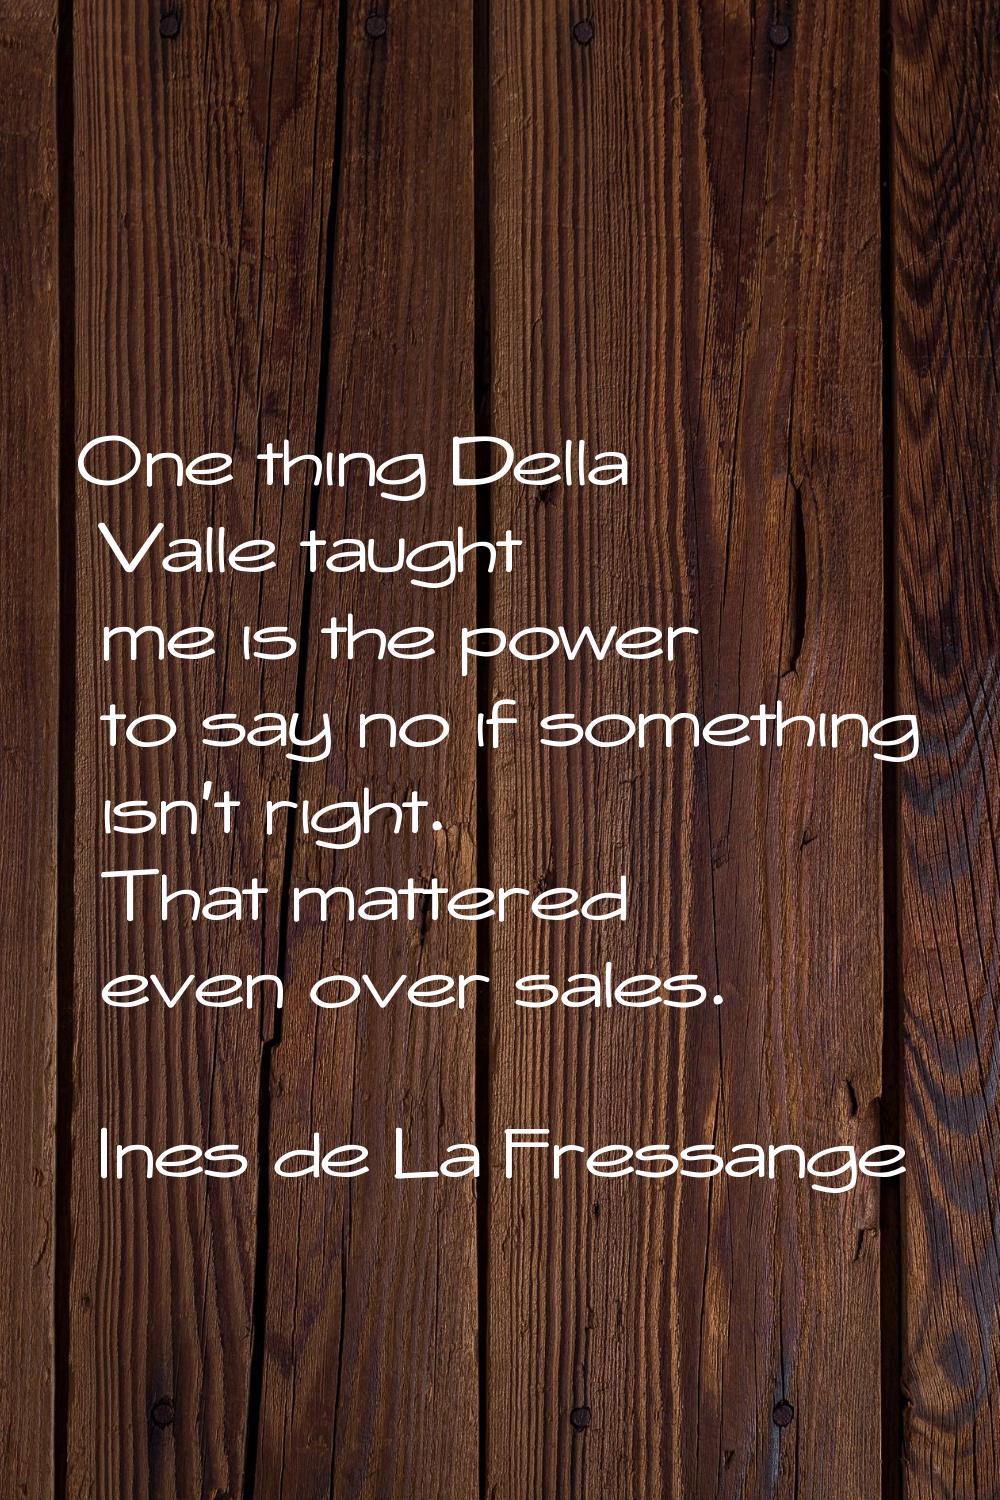 One thing Della Valle taught me is the power to say no if something isn't right. That mattered even